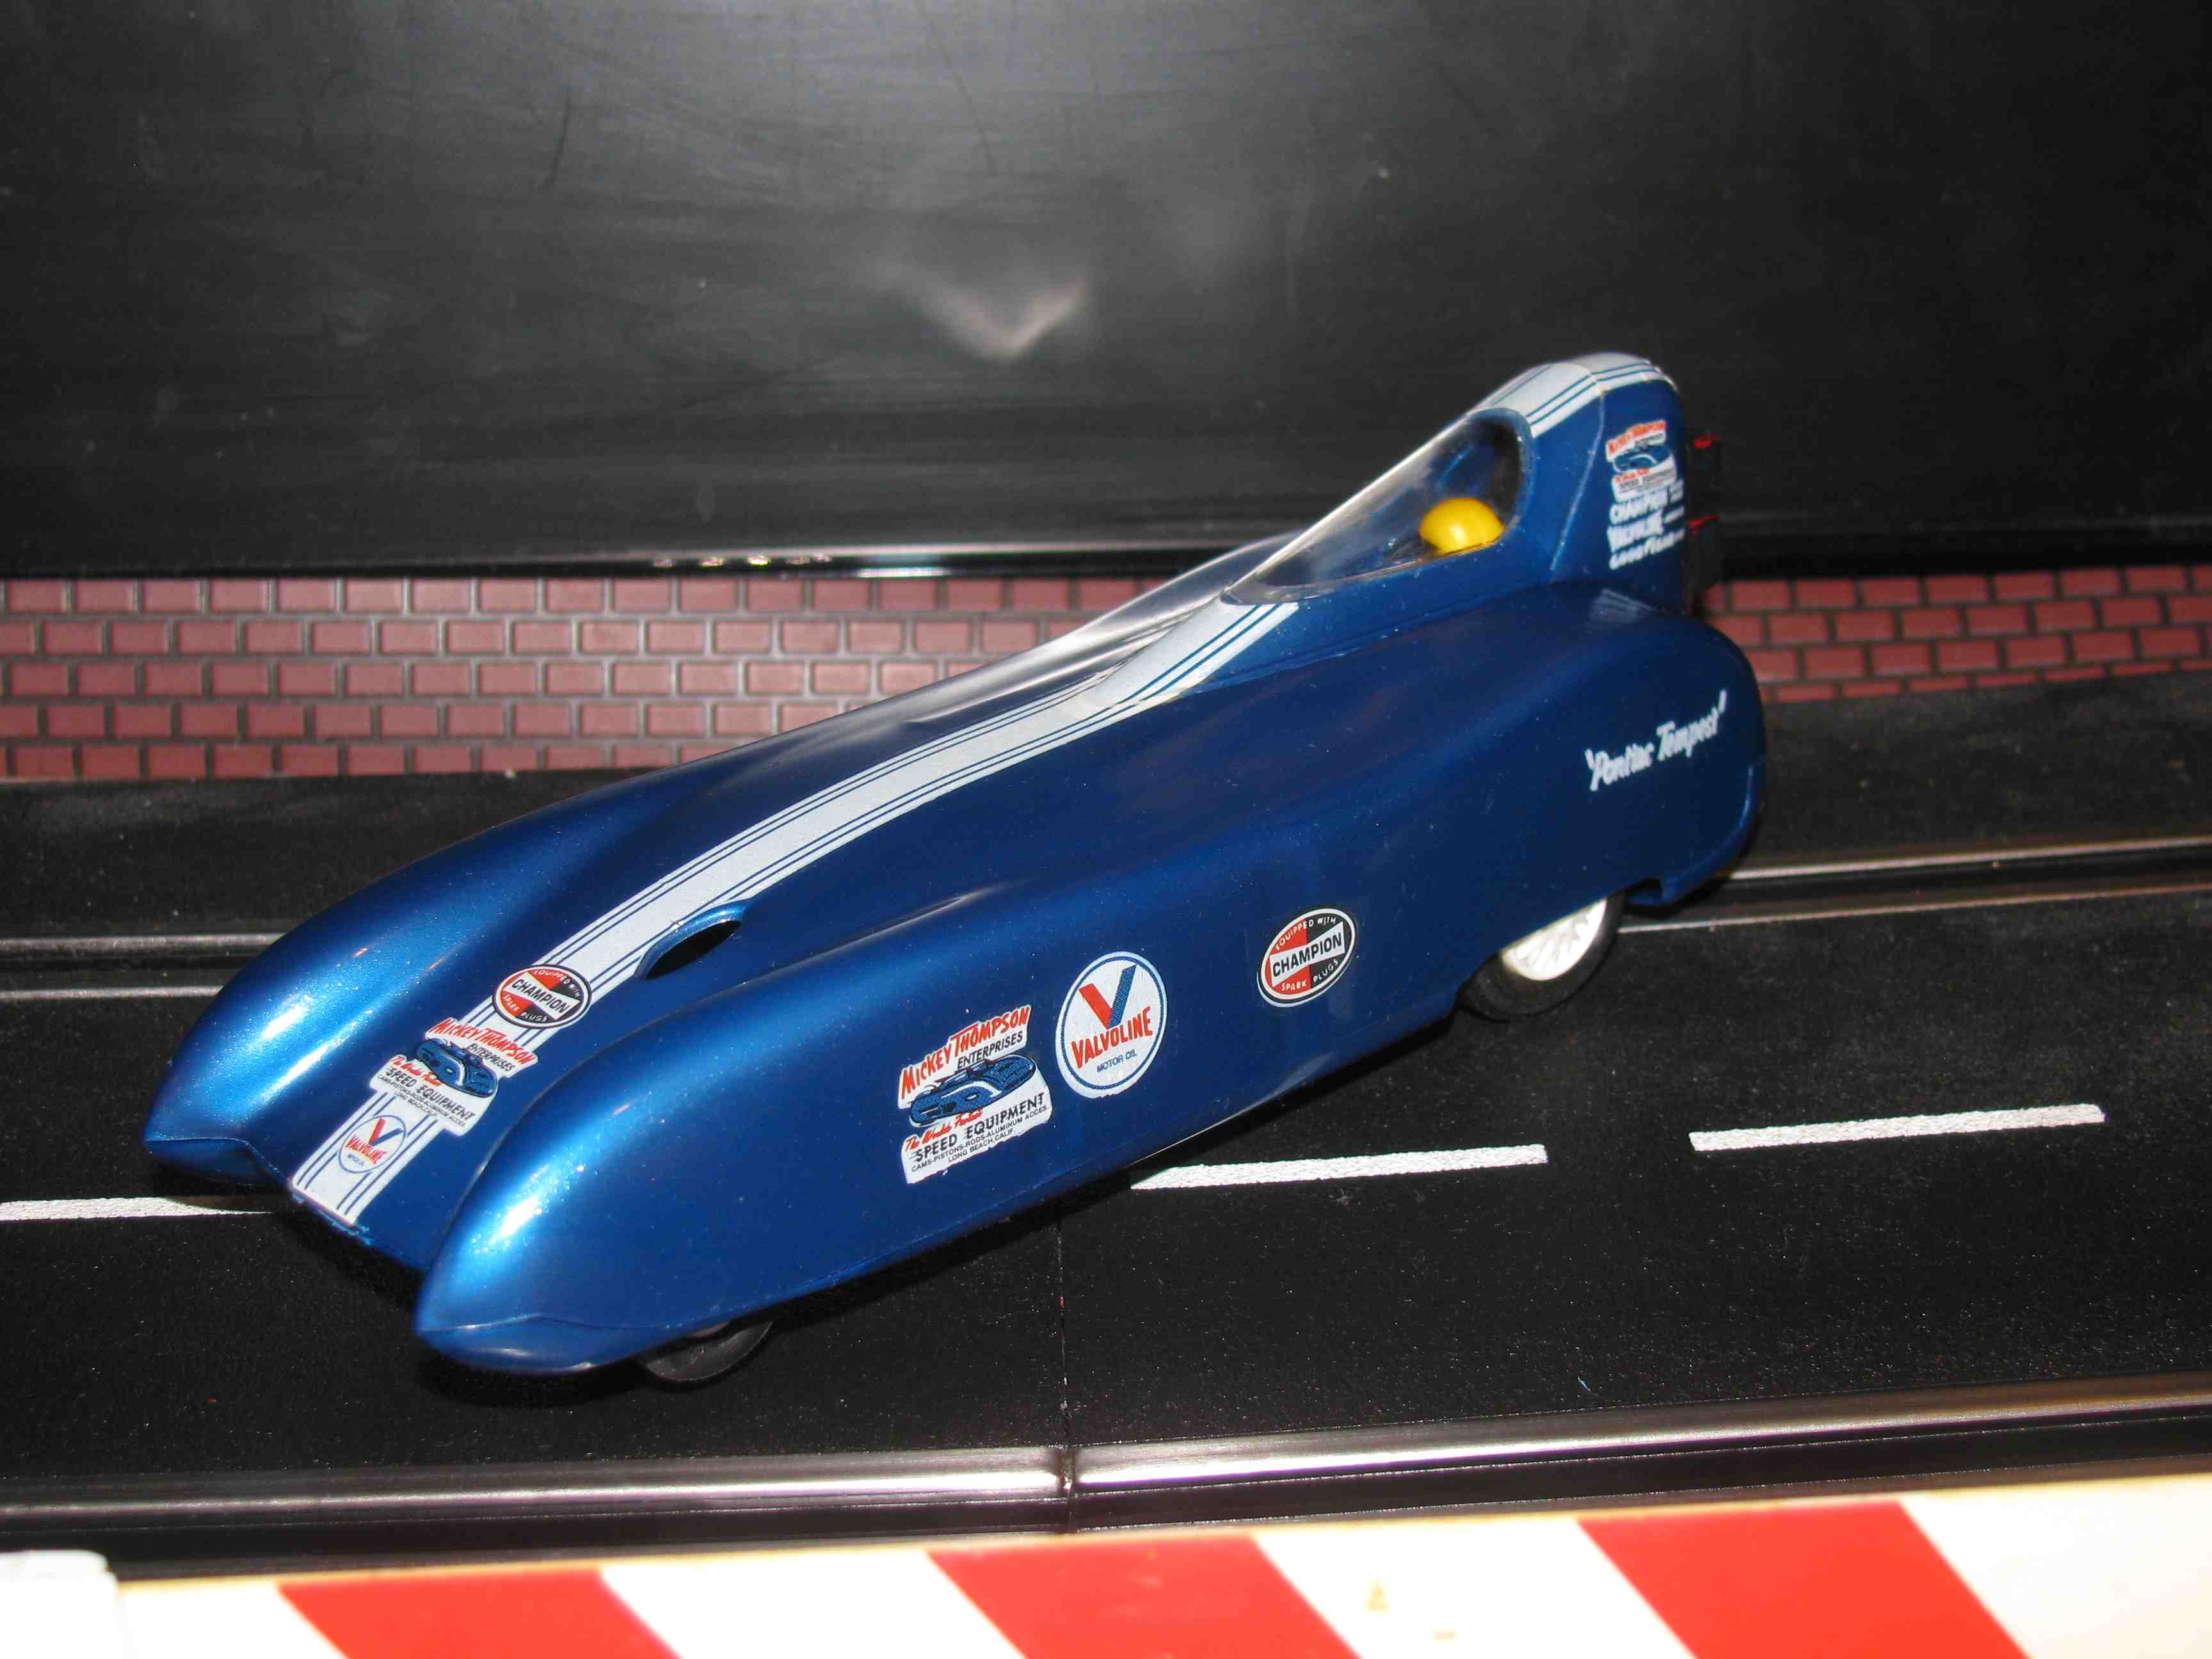 * SOLD * Vintage Revell – Mickey Thompson “ATTEMPT 1” Record Hot Rod Slot Car 1/32 Scale